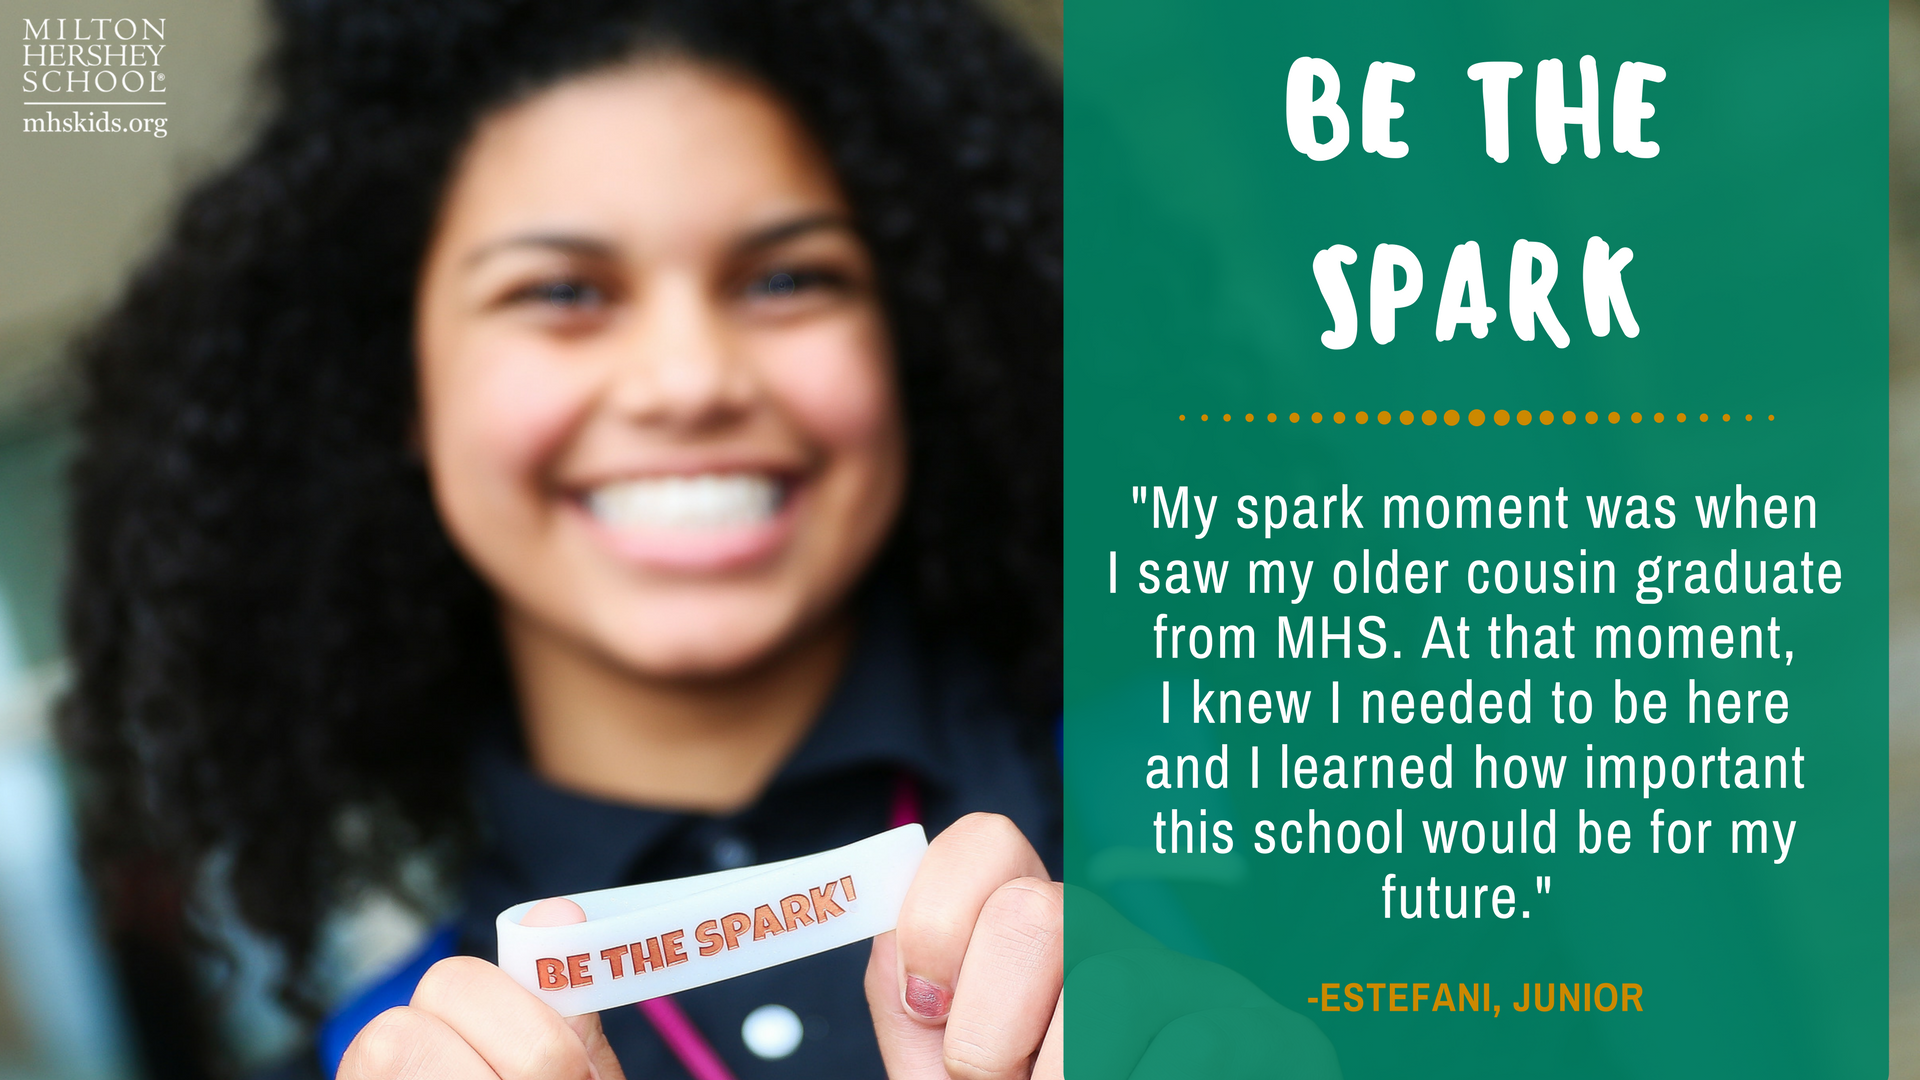 When you live, work, and study in a place that provides continuous support, you have the power to be the spark, find your spark, and share your spark.